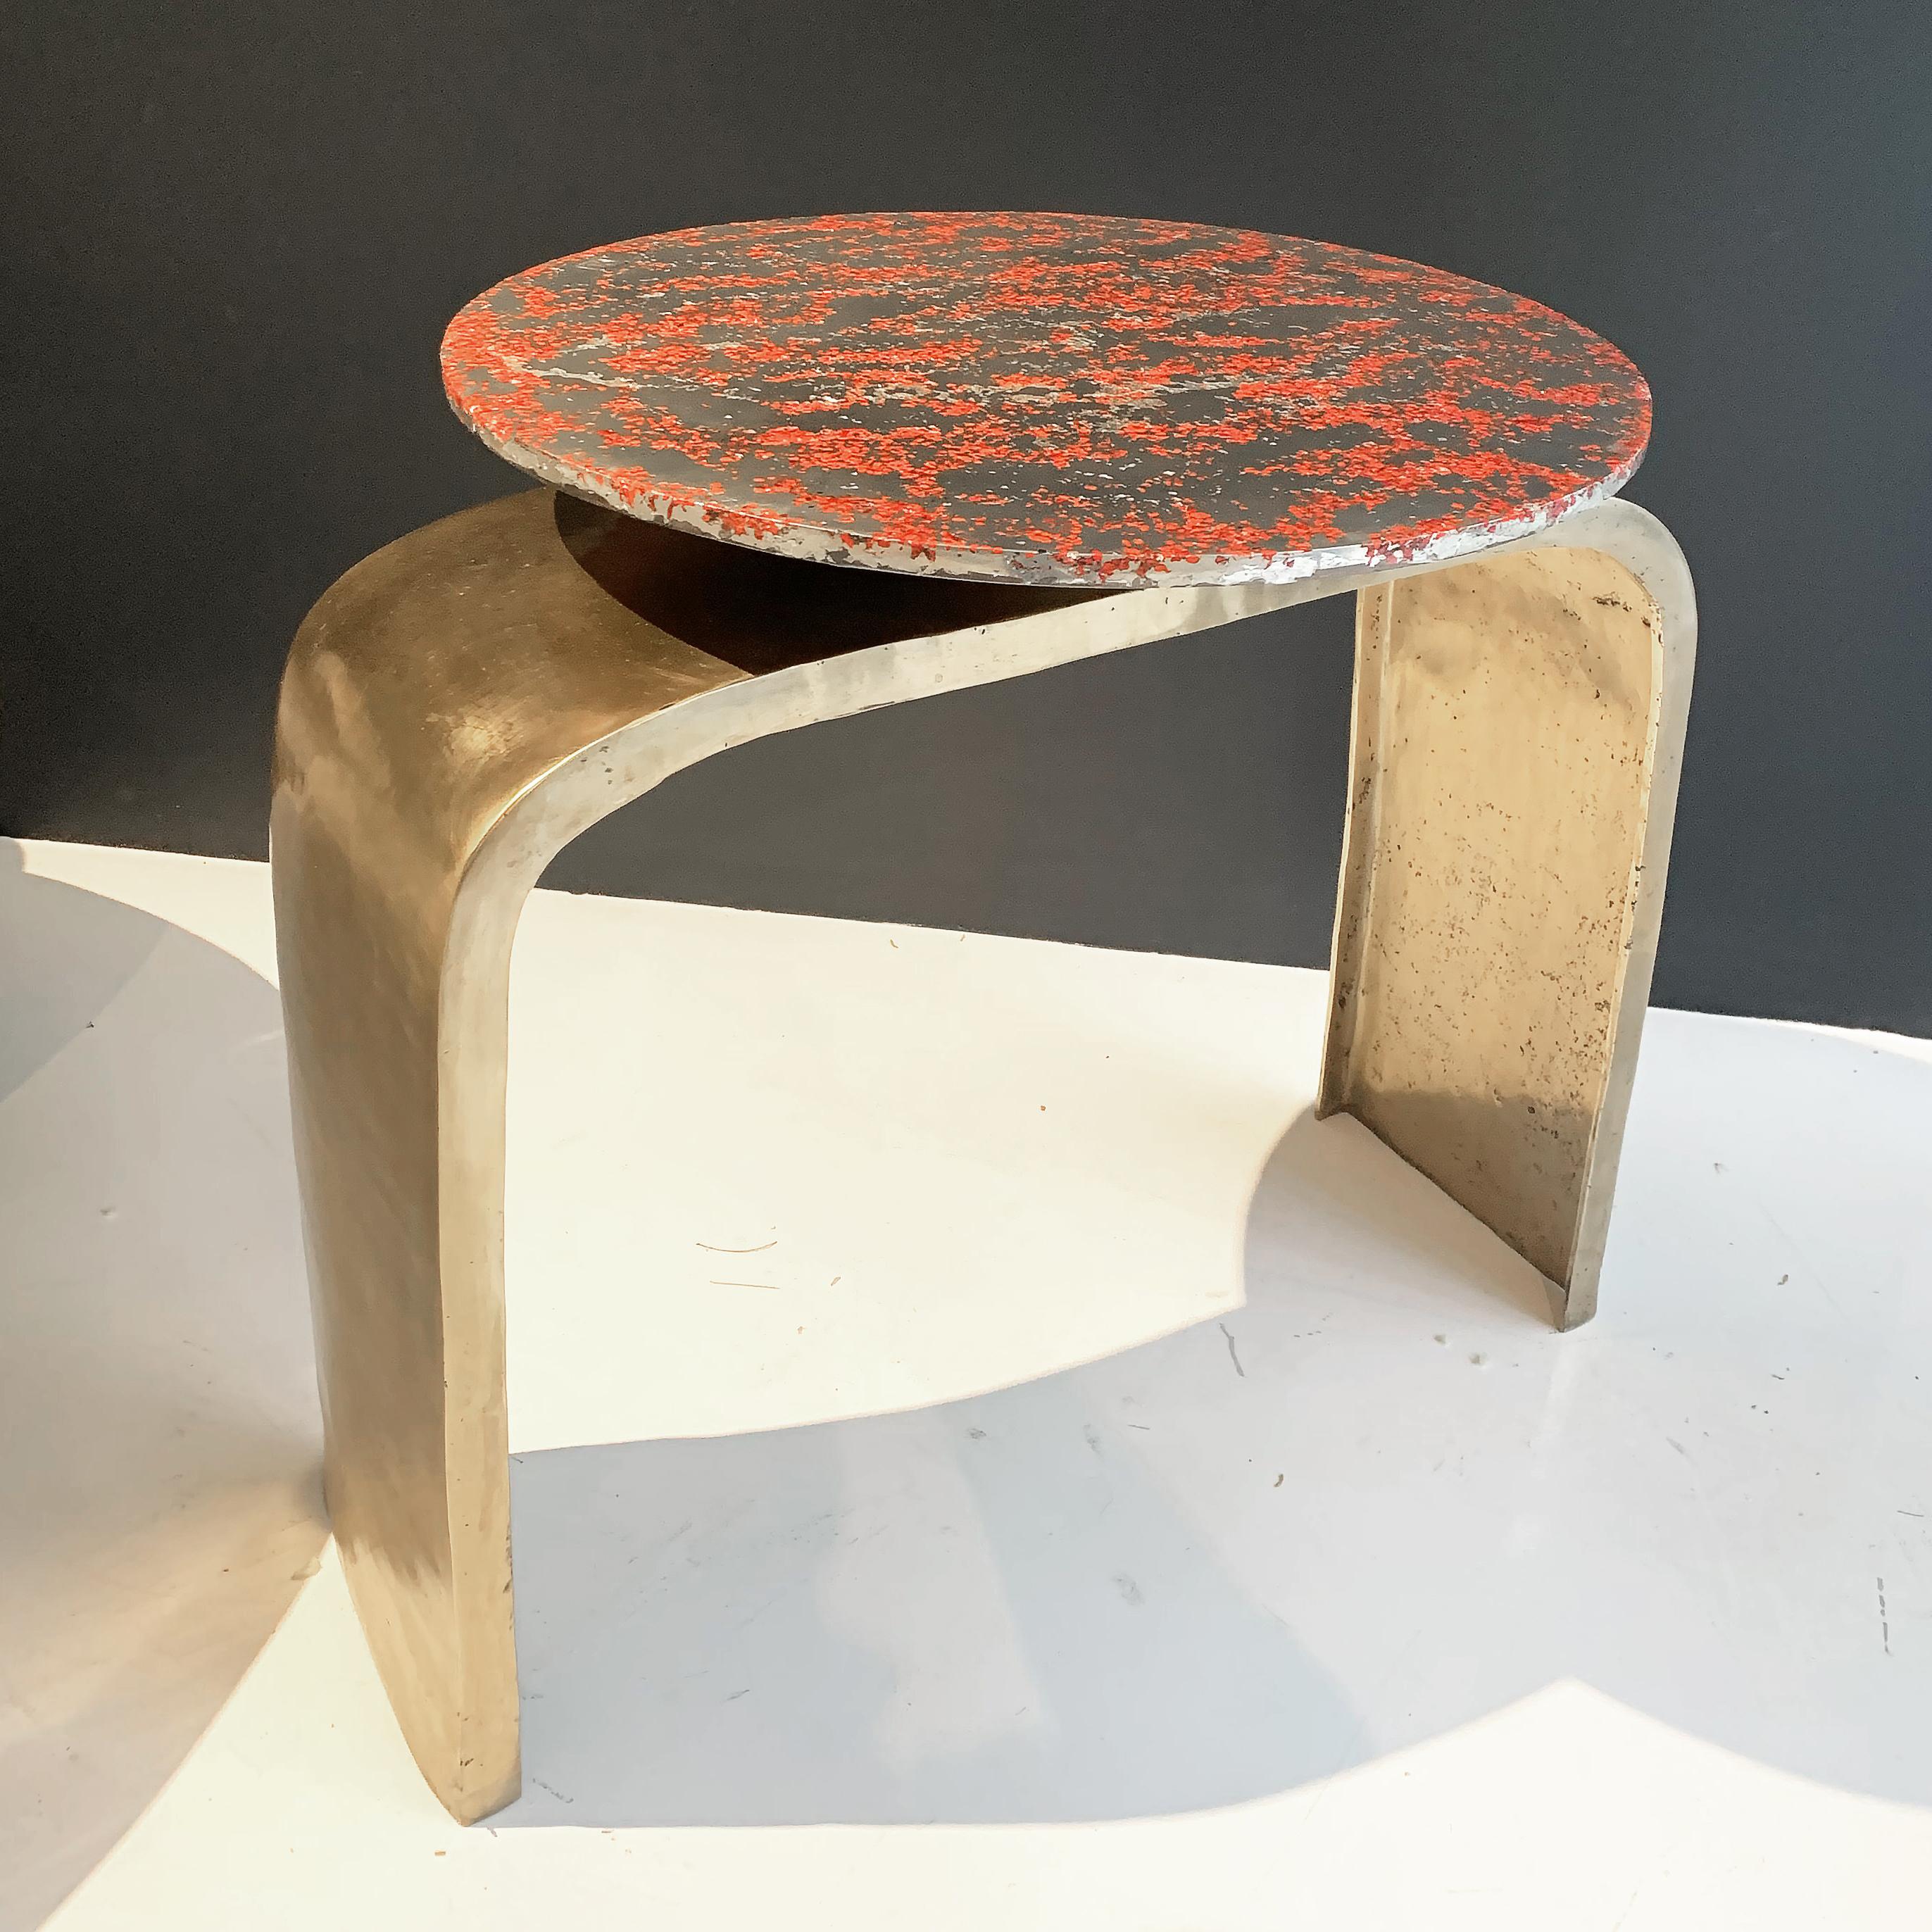 Bronze legs made to order, with desired patina finish. Top in stock: This contemporary table is a unique piece, created by Xavier Lavergne and made of melted pewter with Venice Murano glass, embedded in resin and polished like a marble. The table